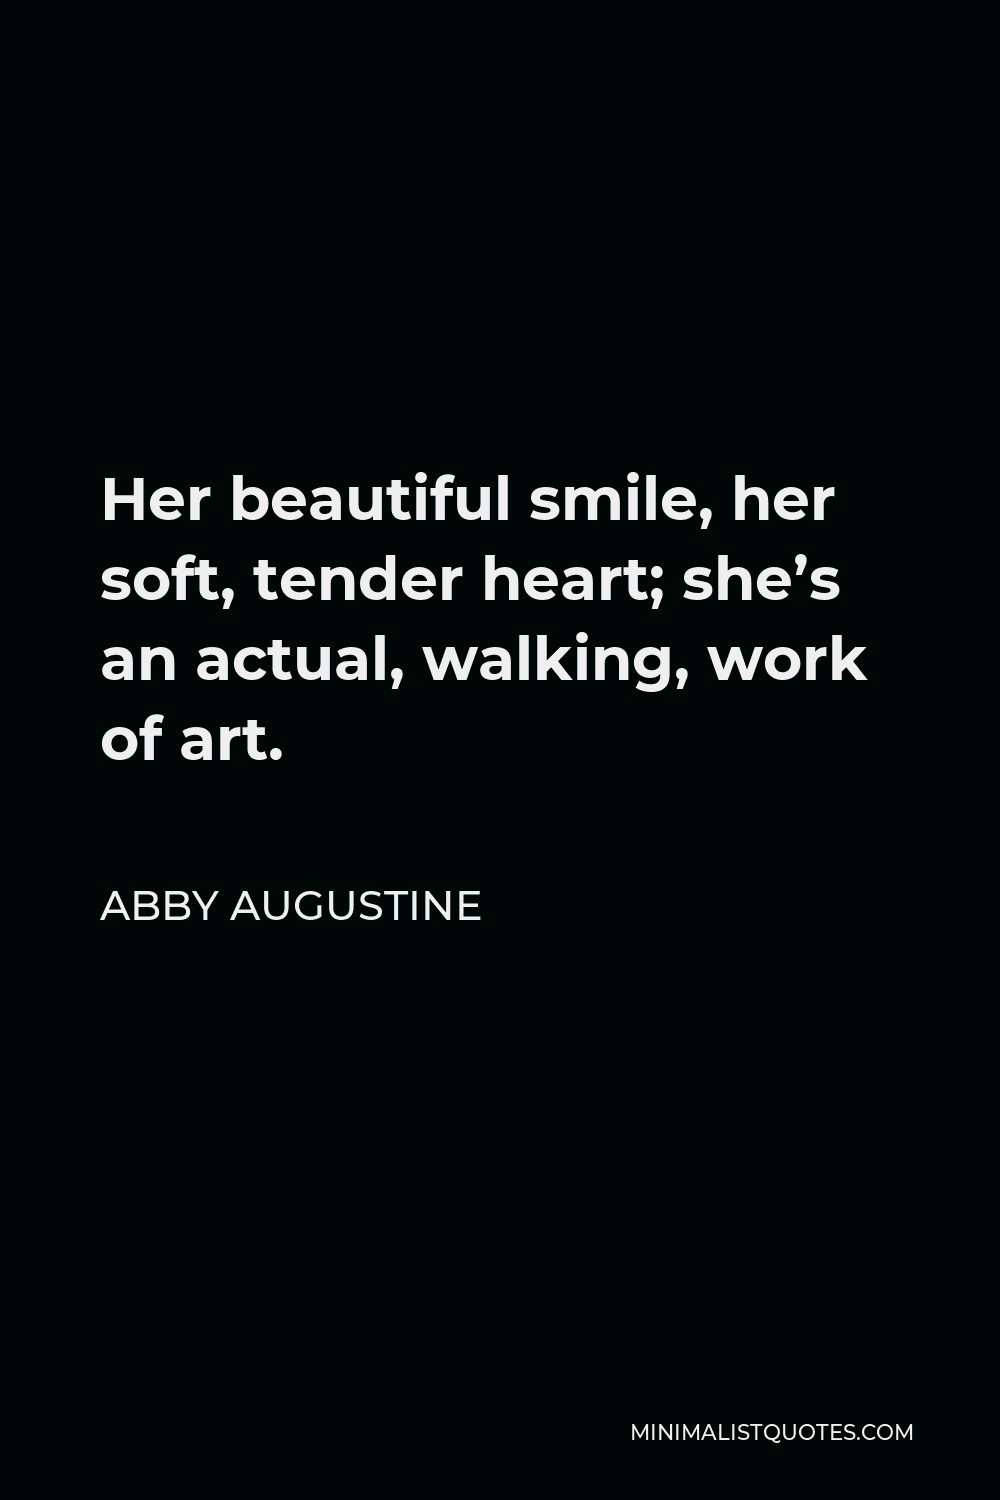 Abby Augustine Quote - Her beautiful smile, her soft, tender heart; she’s an actual, walking, work of art.